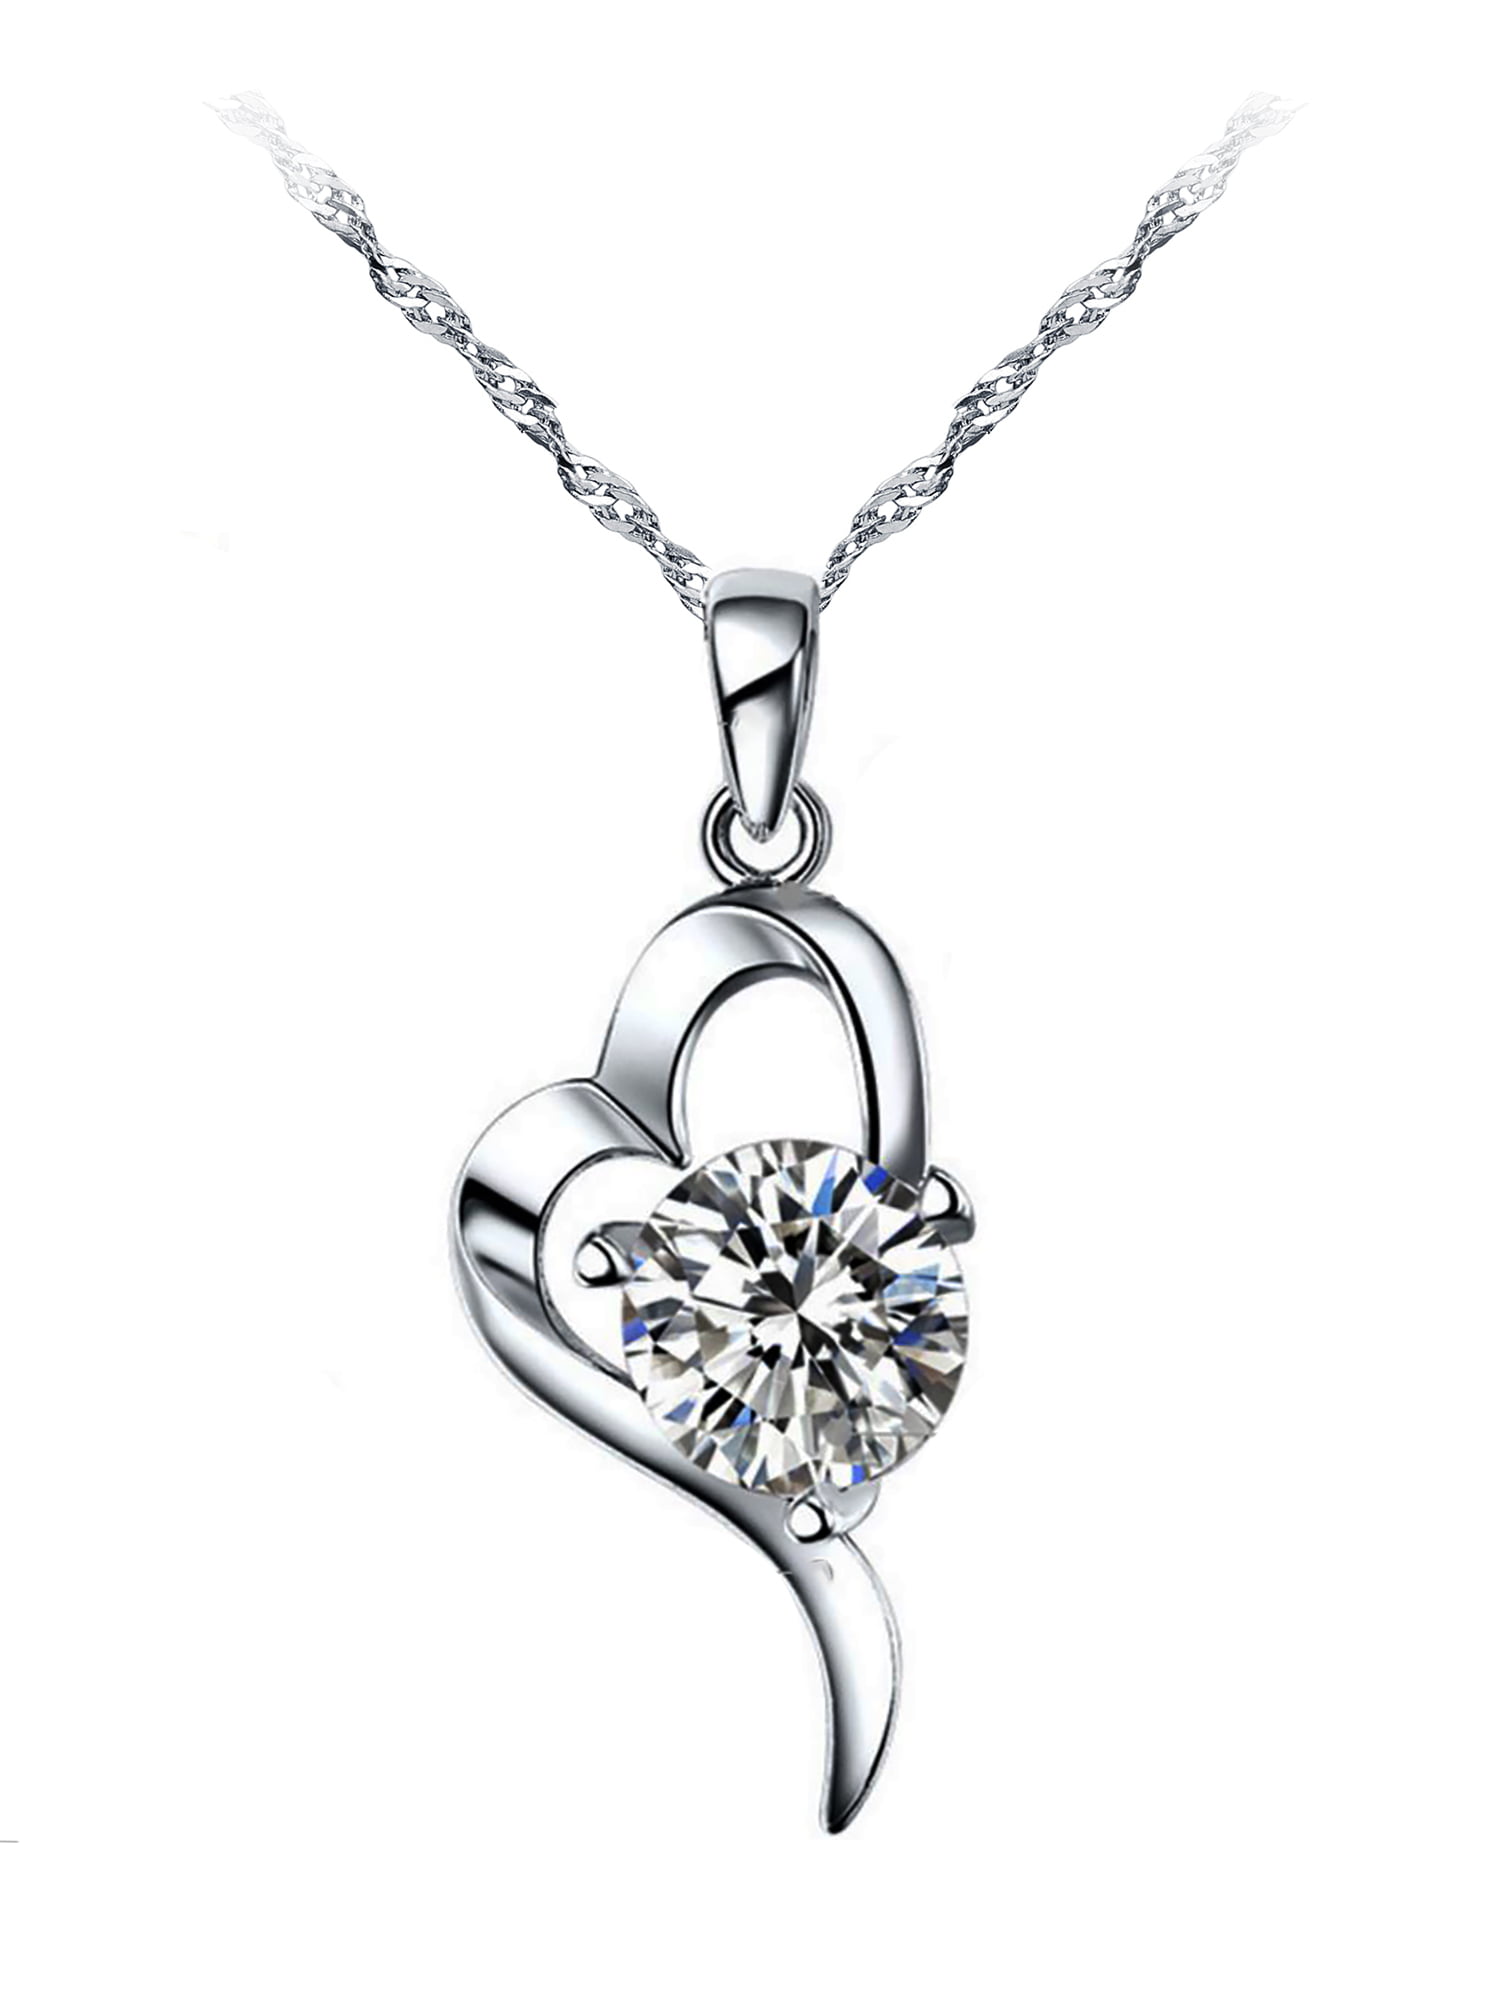 Emma Manor White Gold Plate 1ct Cubic Zirconia Pendant Necklace For Women,18" 